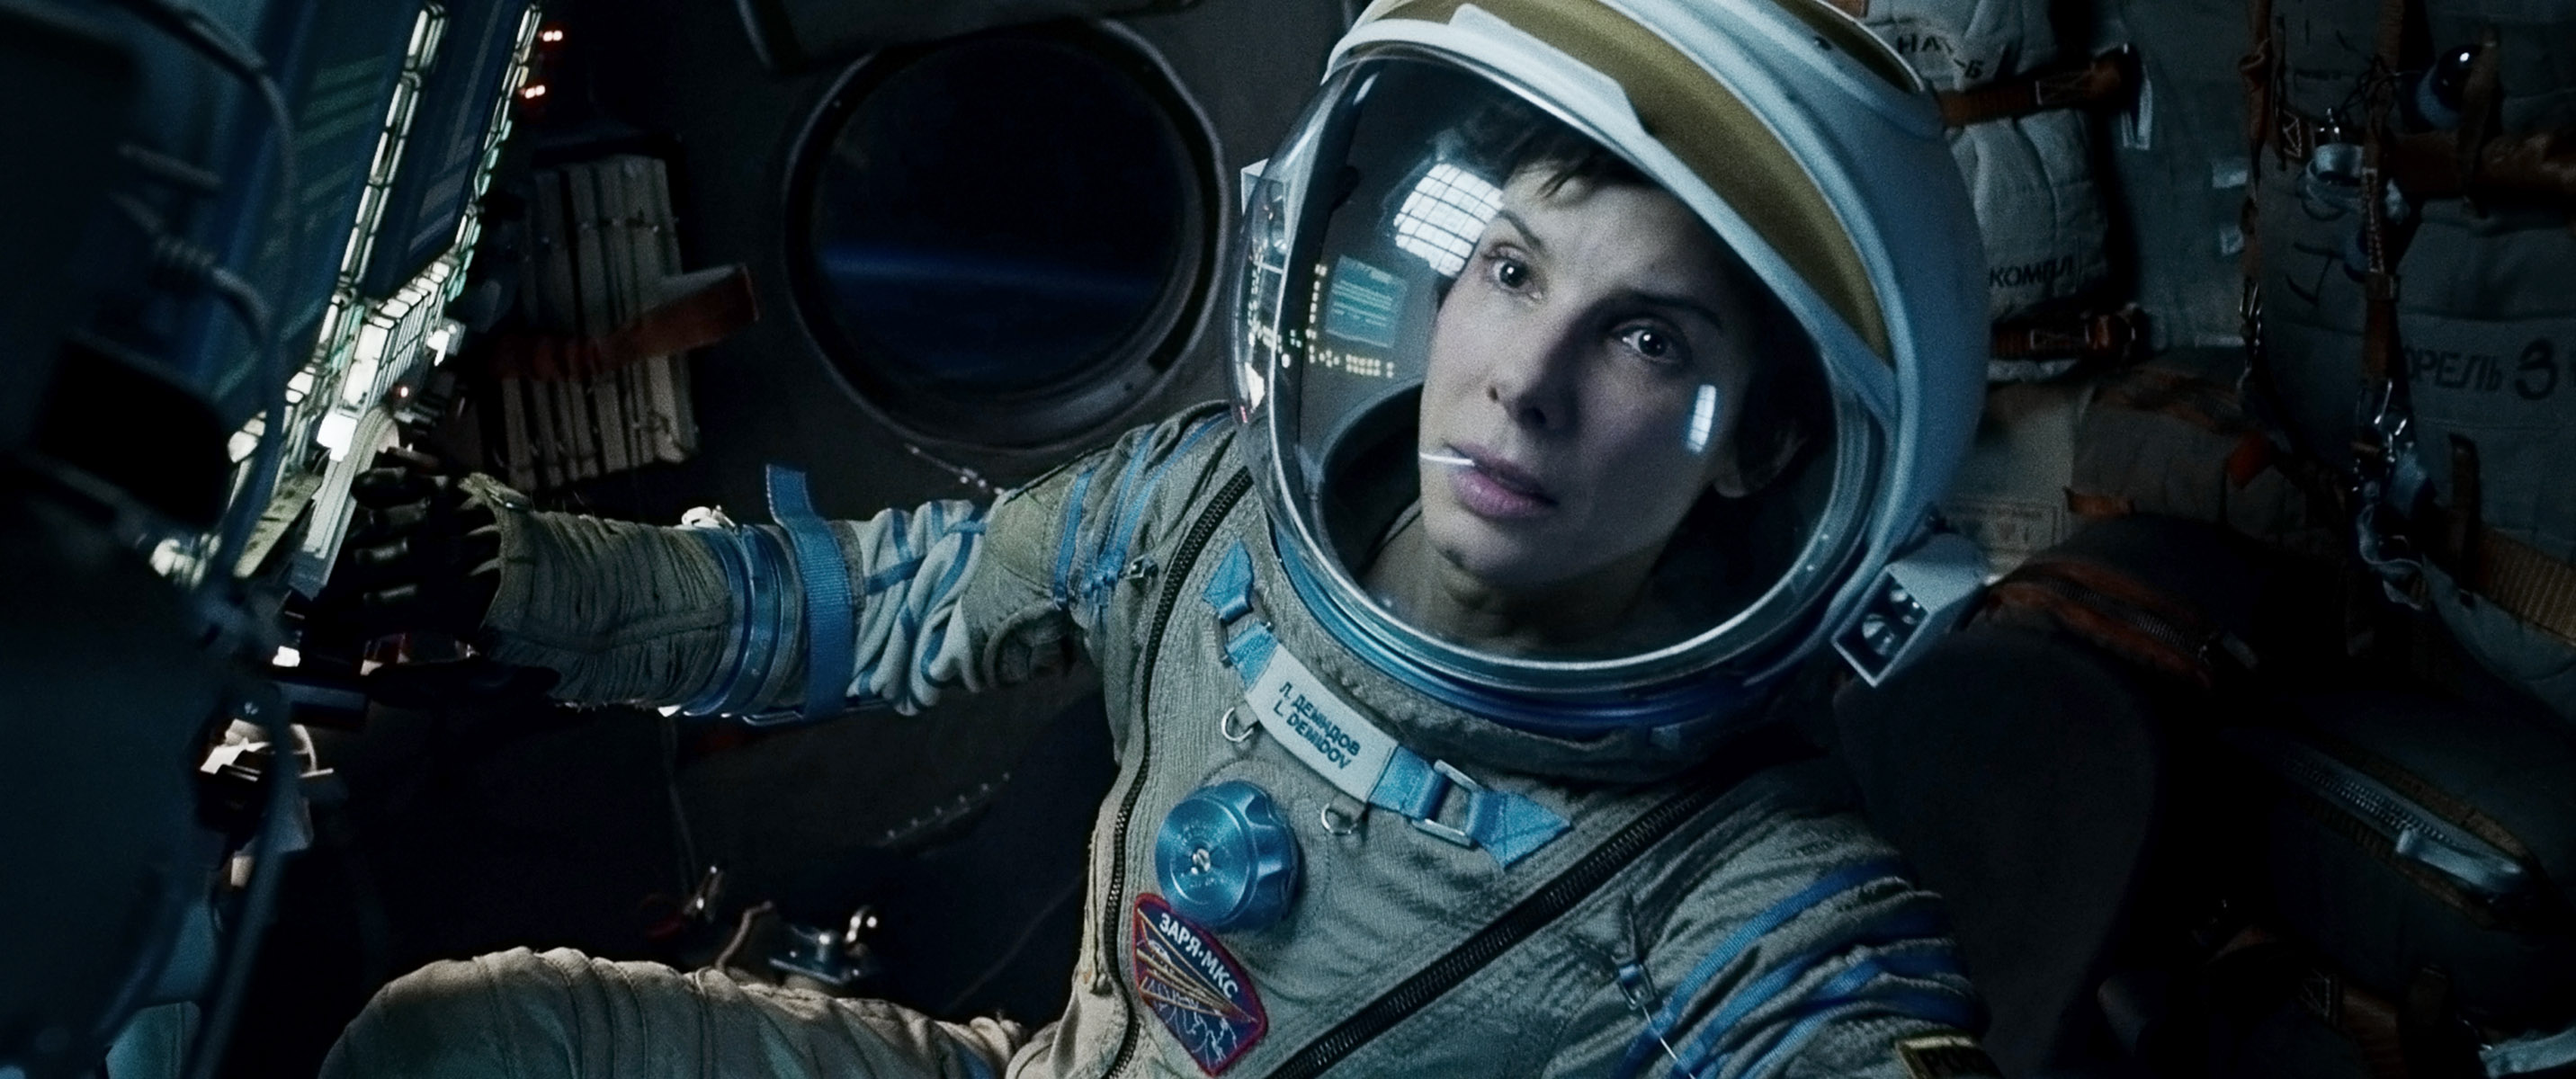 Alfonso Cuarón's "Gravity" will be the pre-opening the Festival.